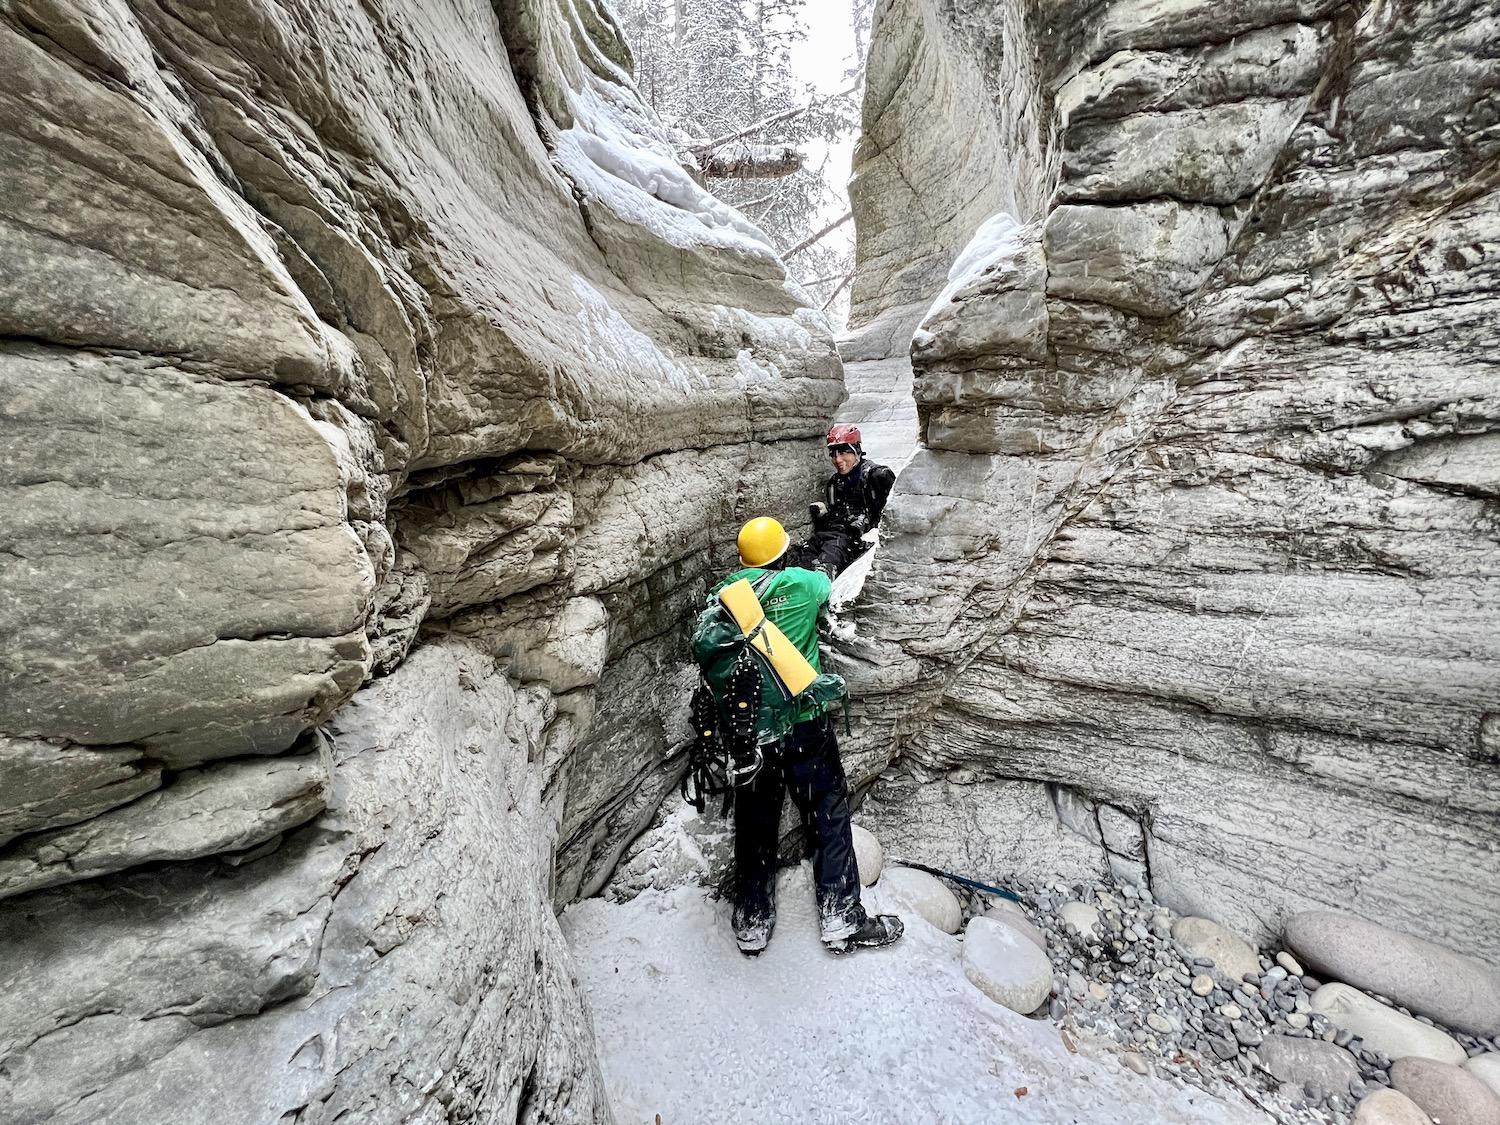 You have to sit down and slide between these rocks at one point during the Maligne Canyon icewalk.